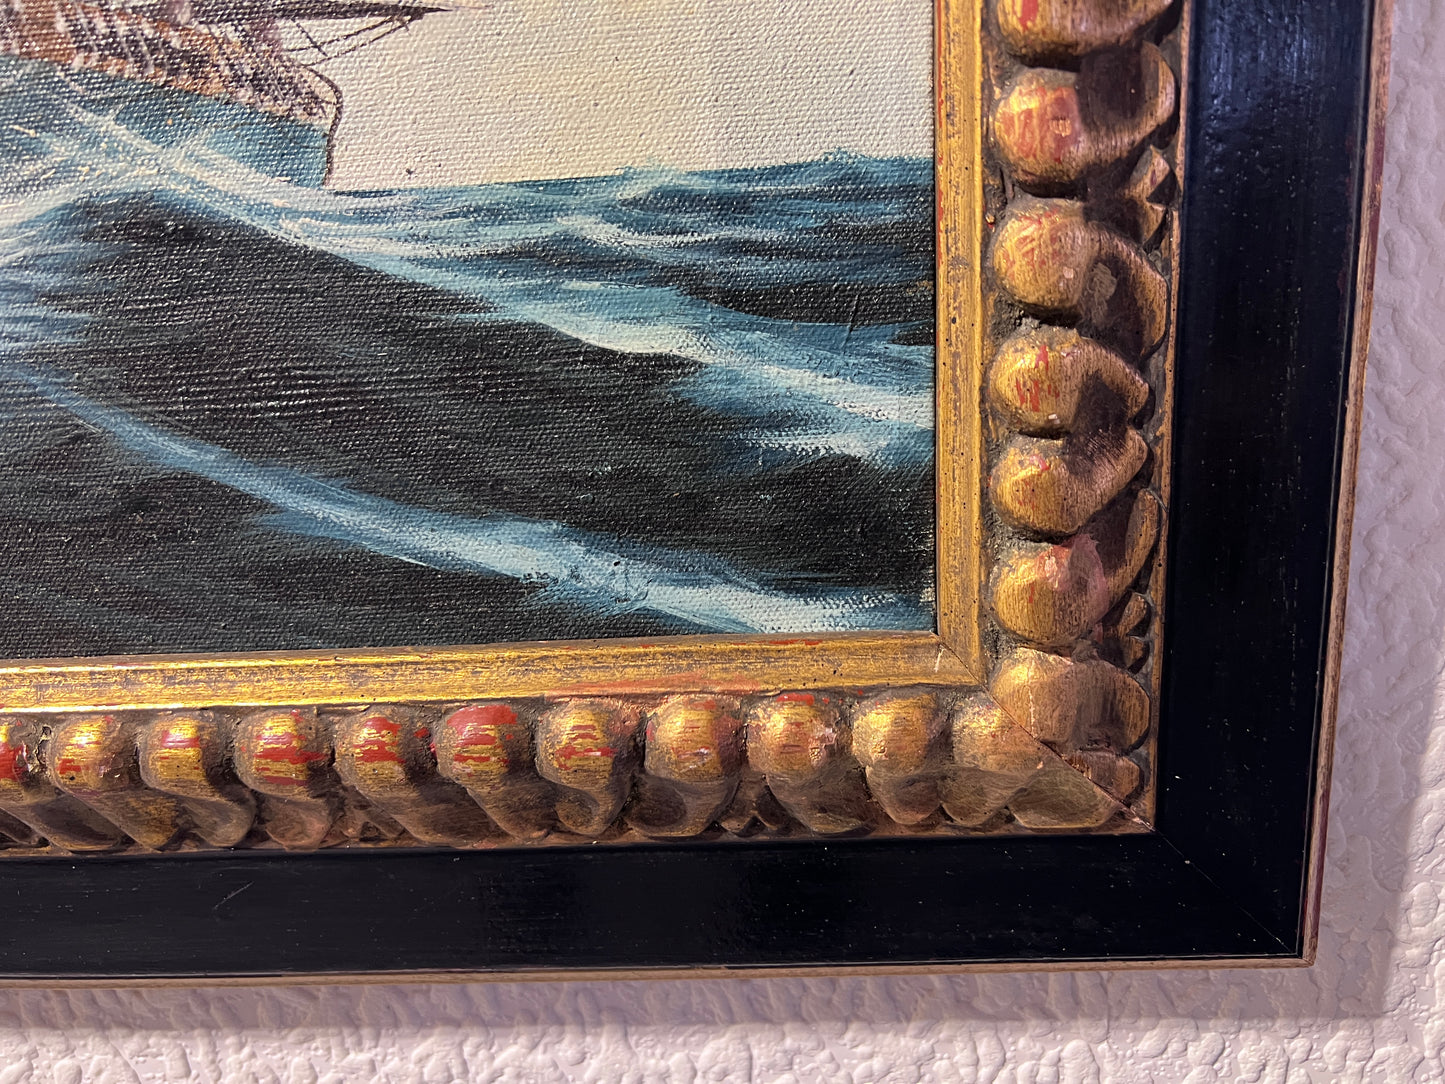 Vintage Oil painting on canvas, seascape, Sailing Ships, T. Orcelli, framed